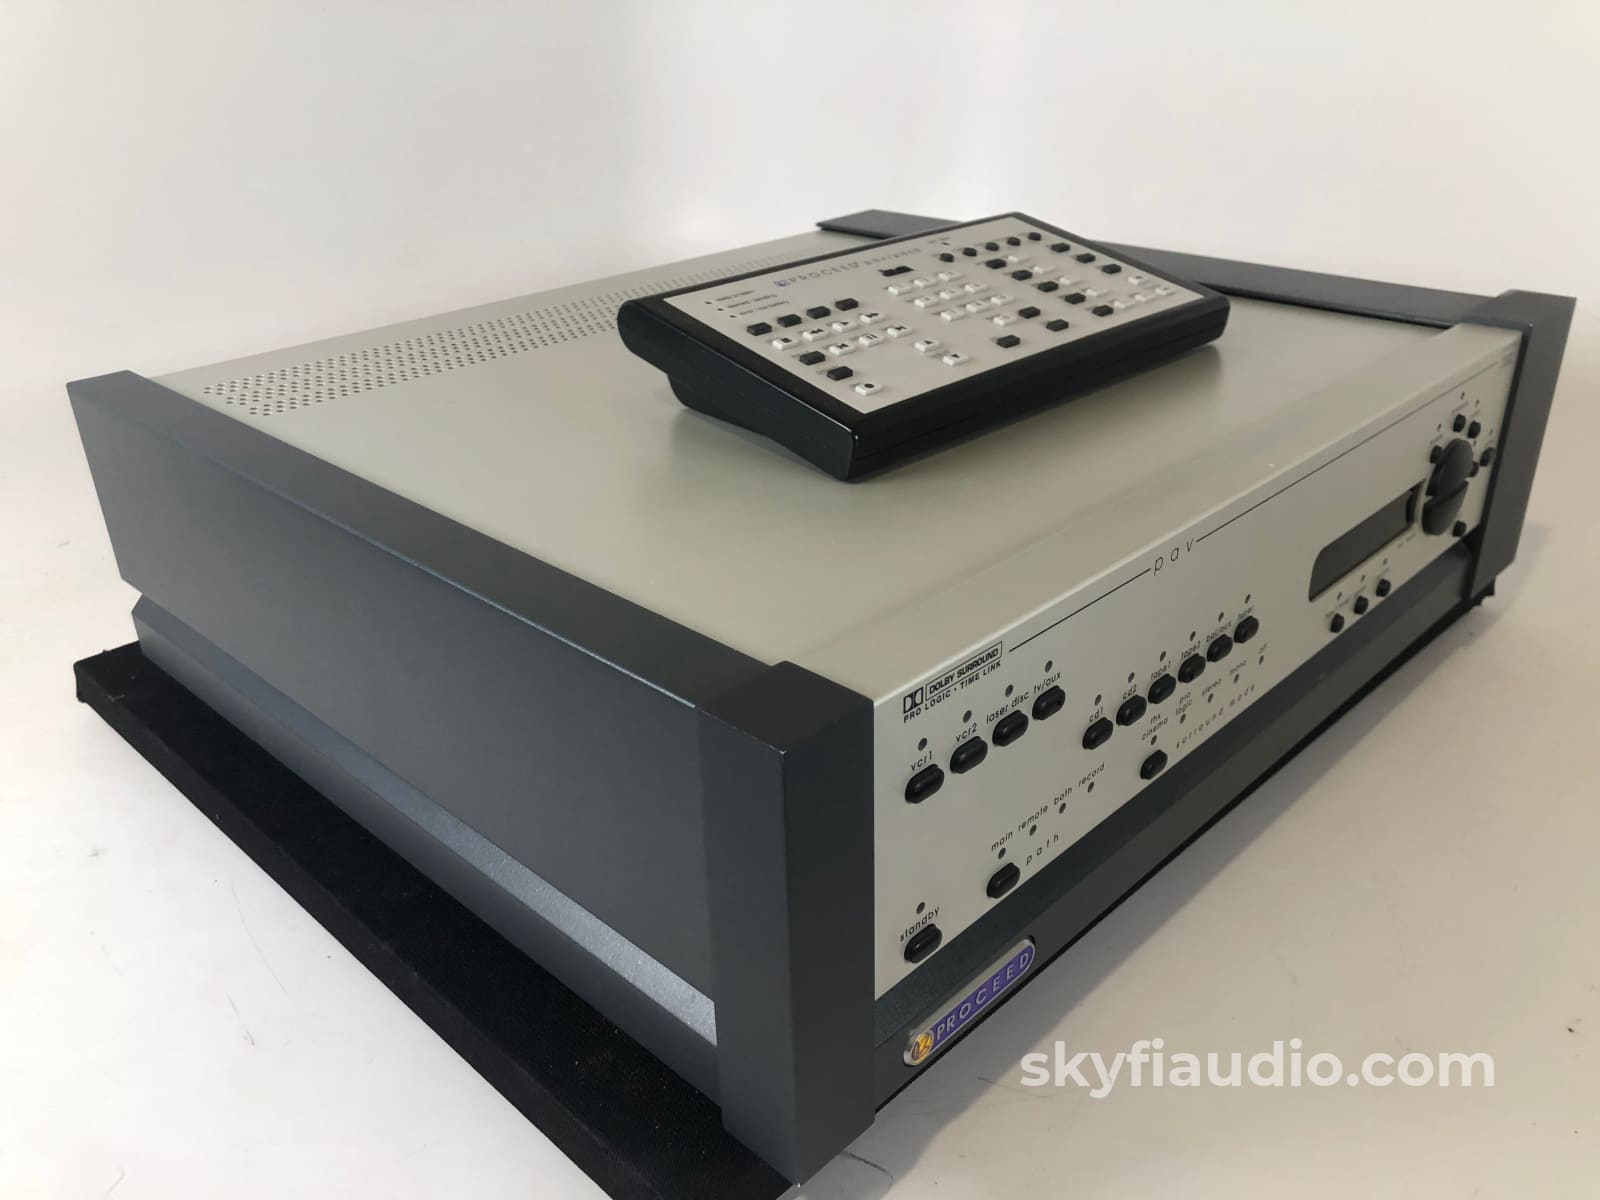 Proceed By Mark Levinson Pav Theater Processor / Stereo Preamp Preamplifier